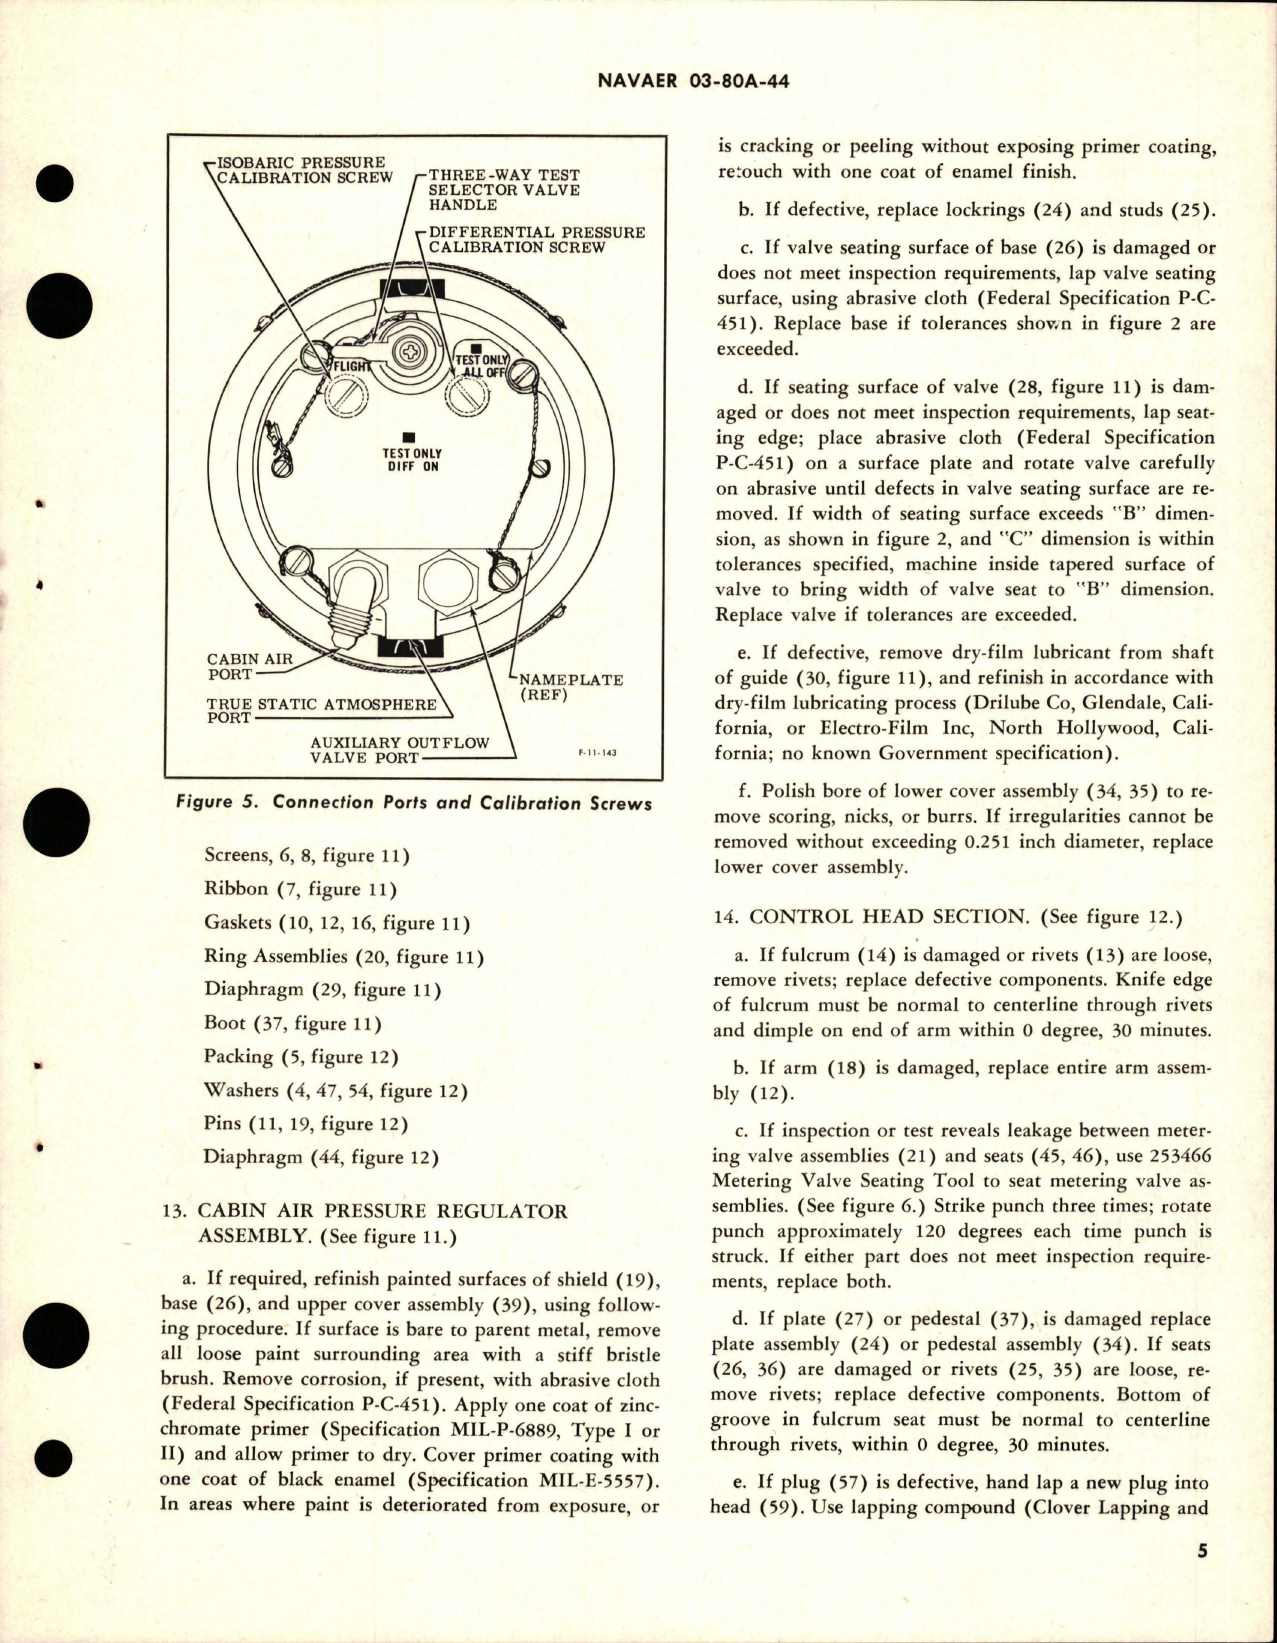 Sample page 5 from AirCorps Library document: Overhaul Instructions with Parts Breakdown for Aircraft Cabin Air Pressure Regulator - Part 102108-11 - Model CPR1-80-1 